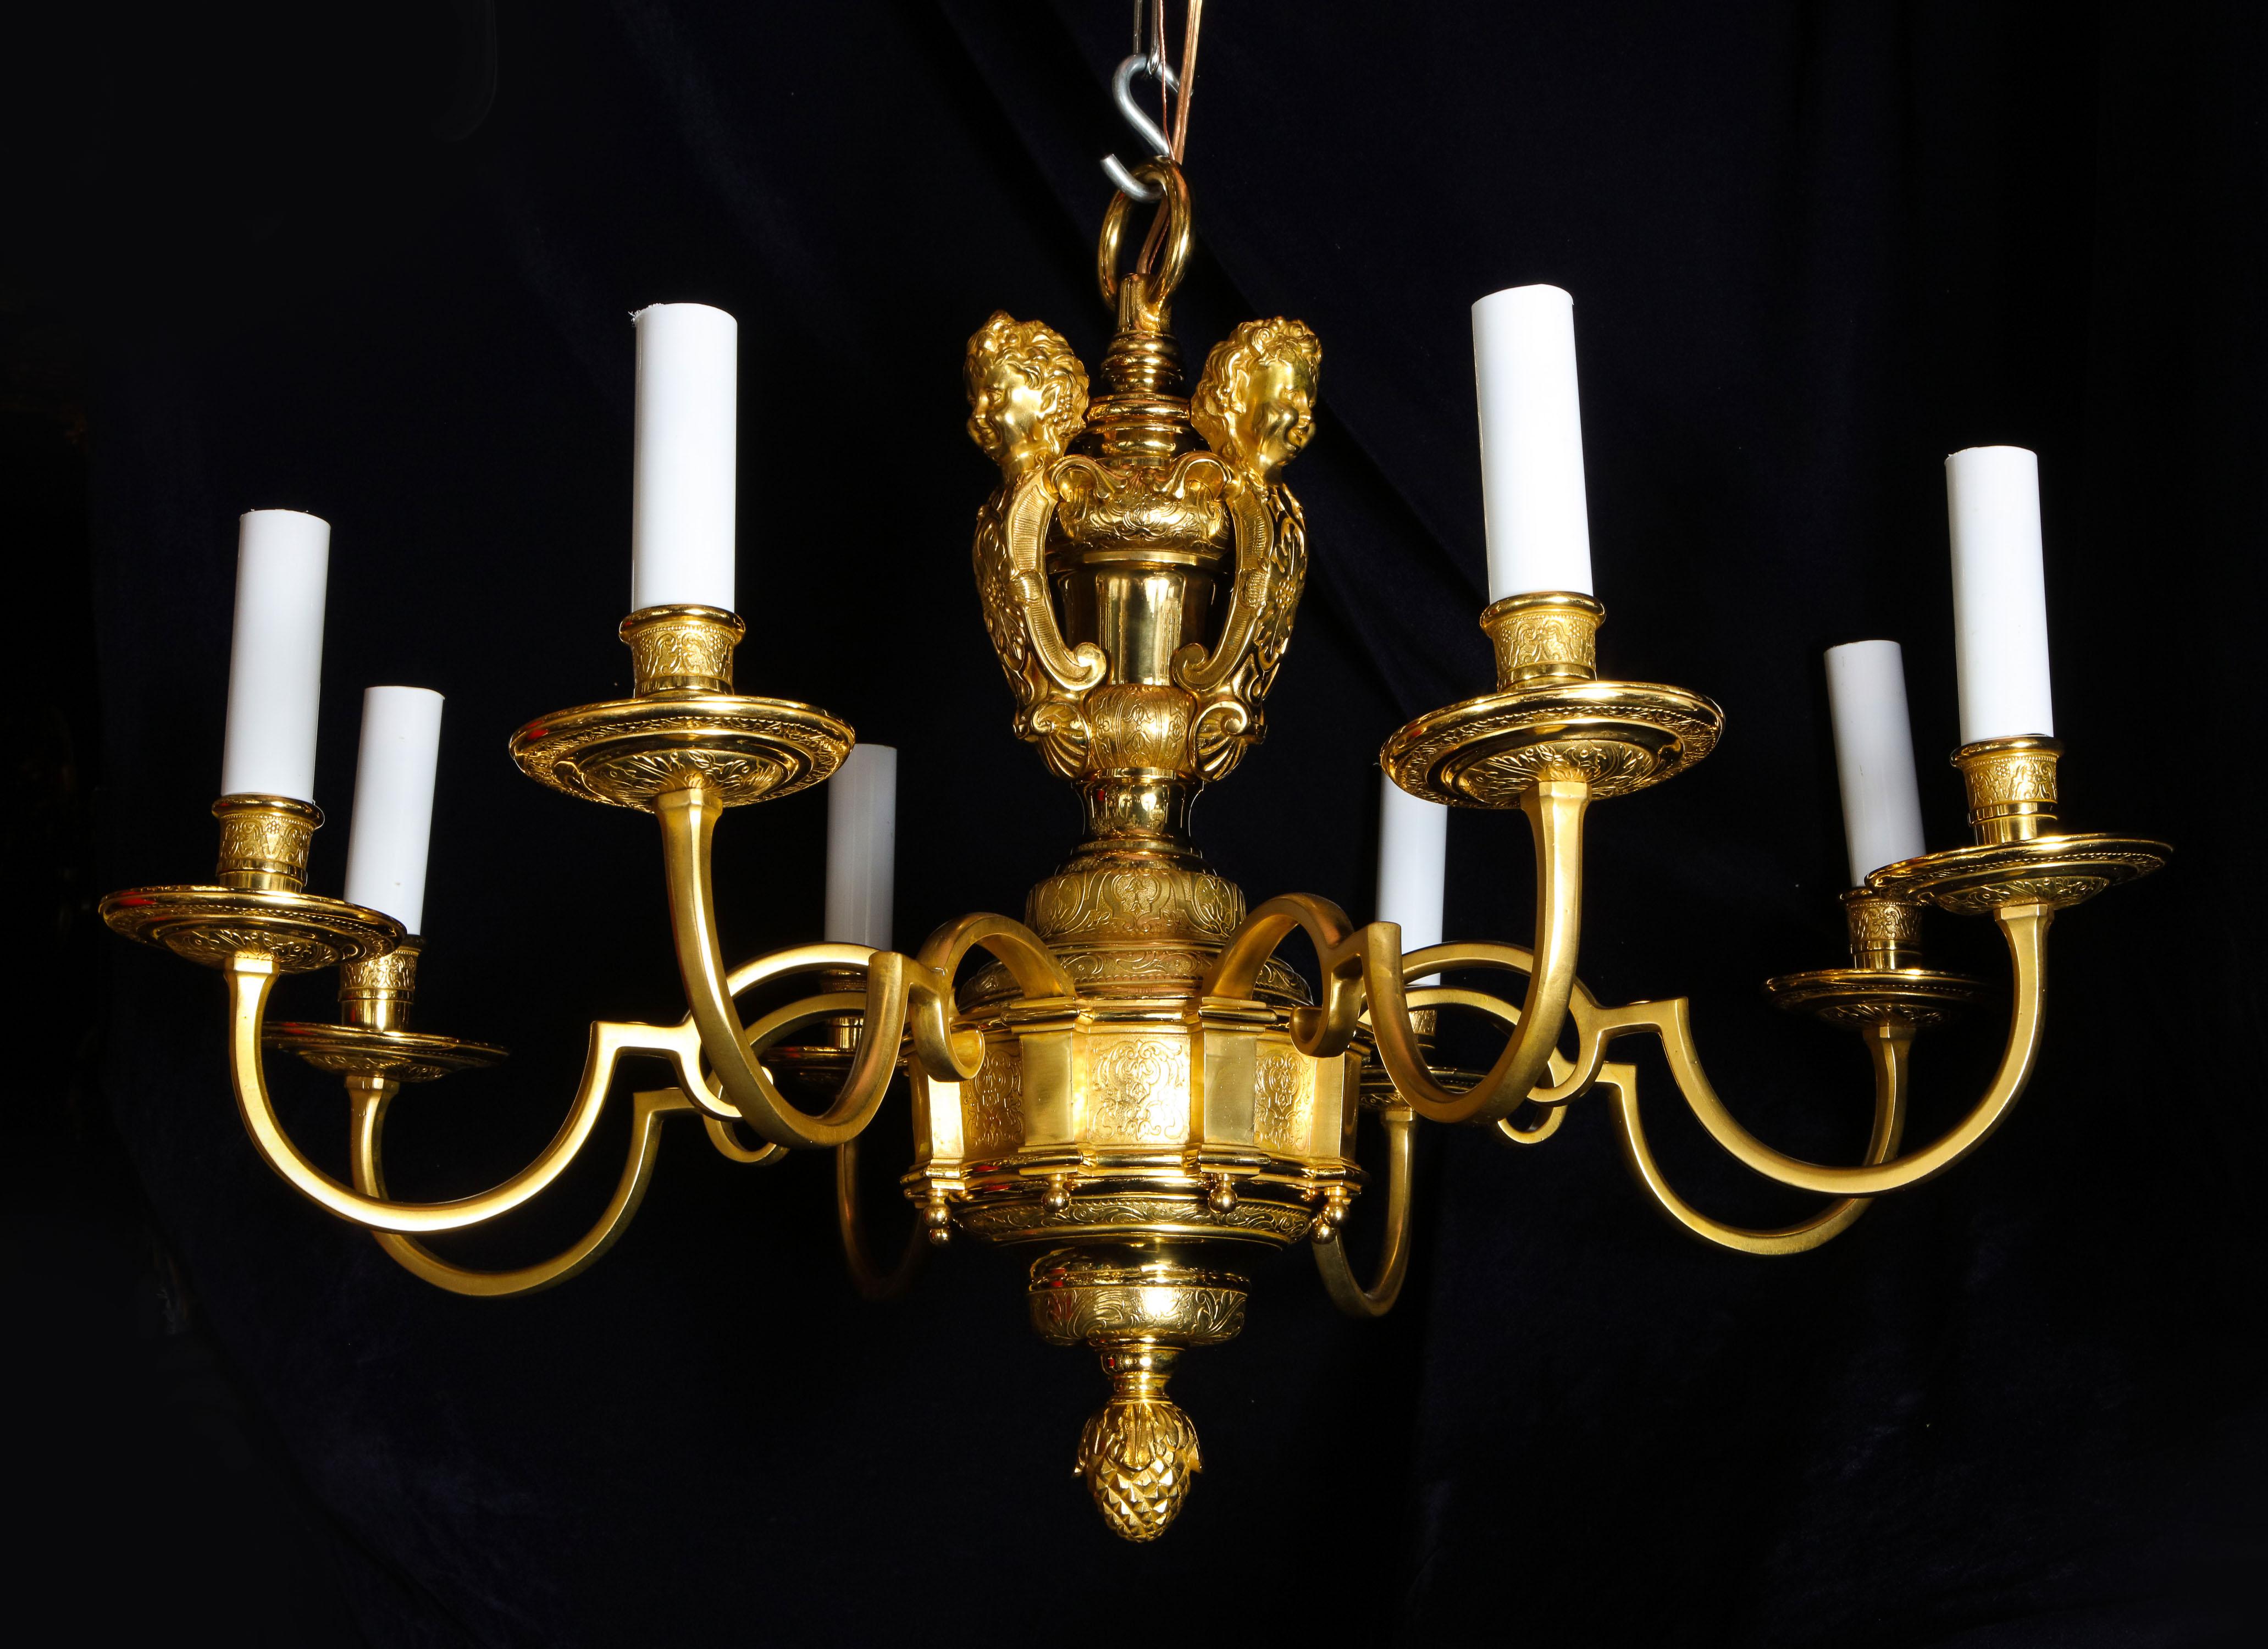 A pair of fine antique French Louis XVI style gilt bronze eight-arm chandeliers of superb workmanship embellished neoclassical hand chased motifs and further adorned with figural masks of cupids.